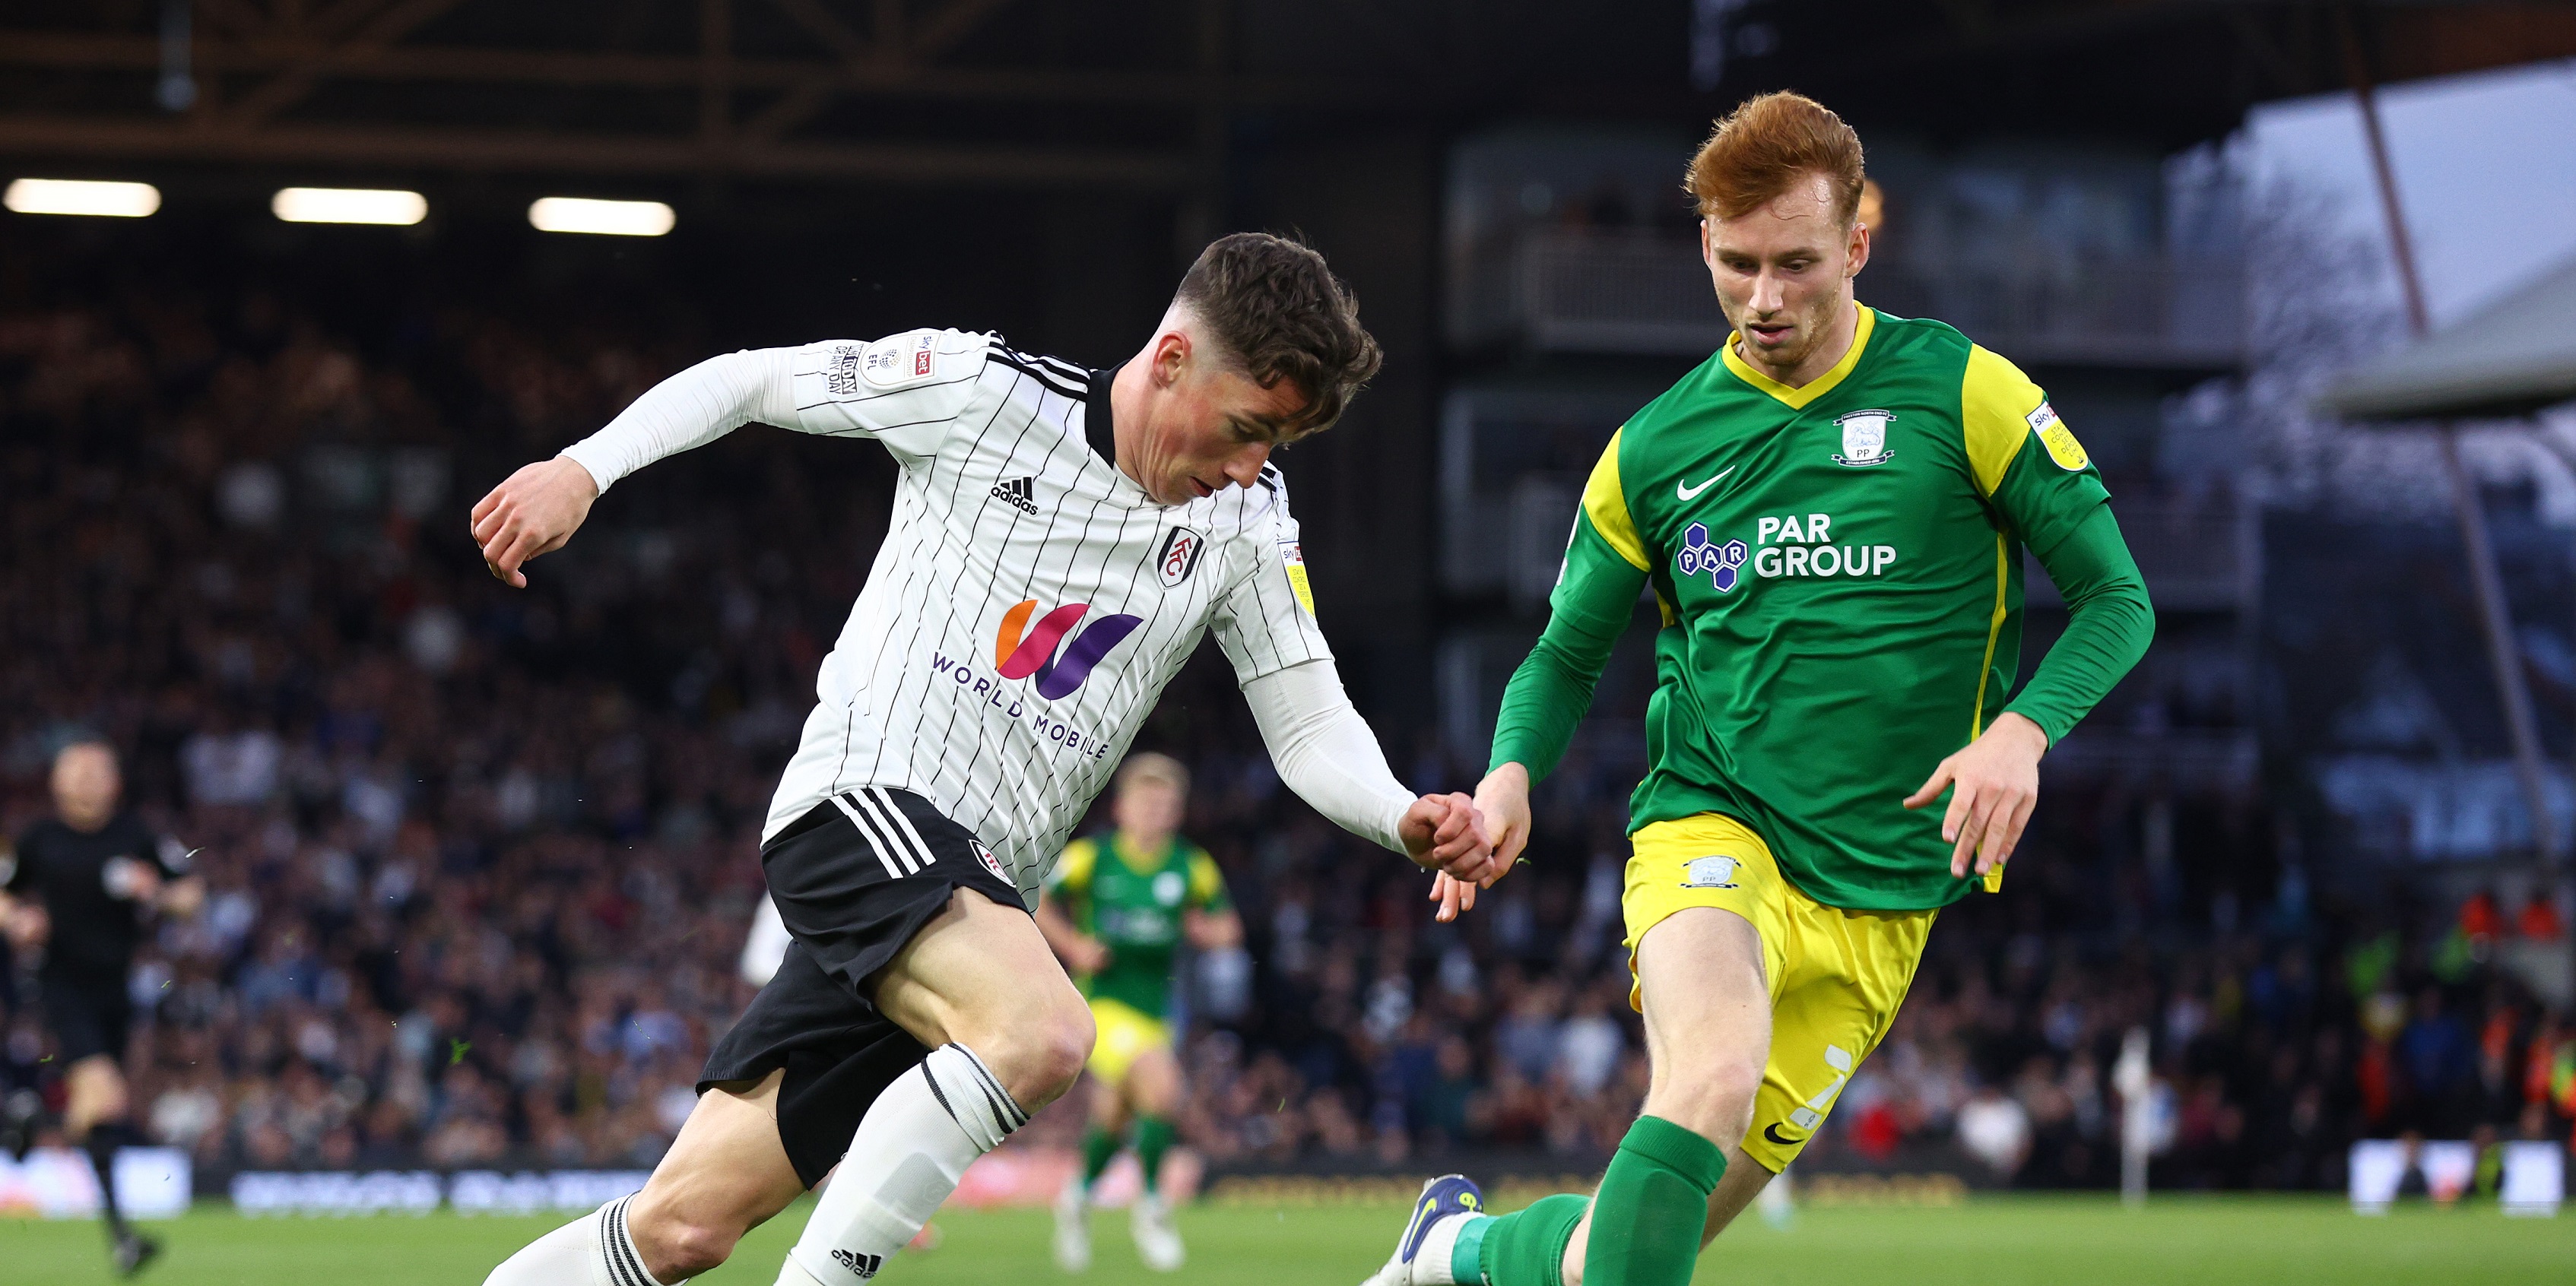 ‘Just look at my shoulders’ – Sepp van den Berg reveals one major benefit from his time at Preston North End and explains latest loan switch